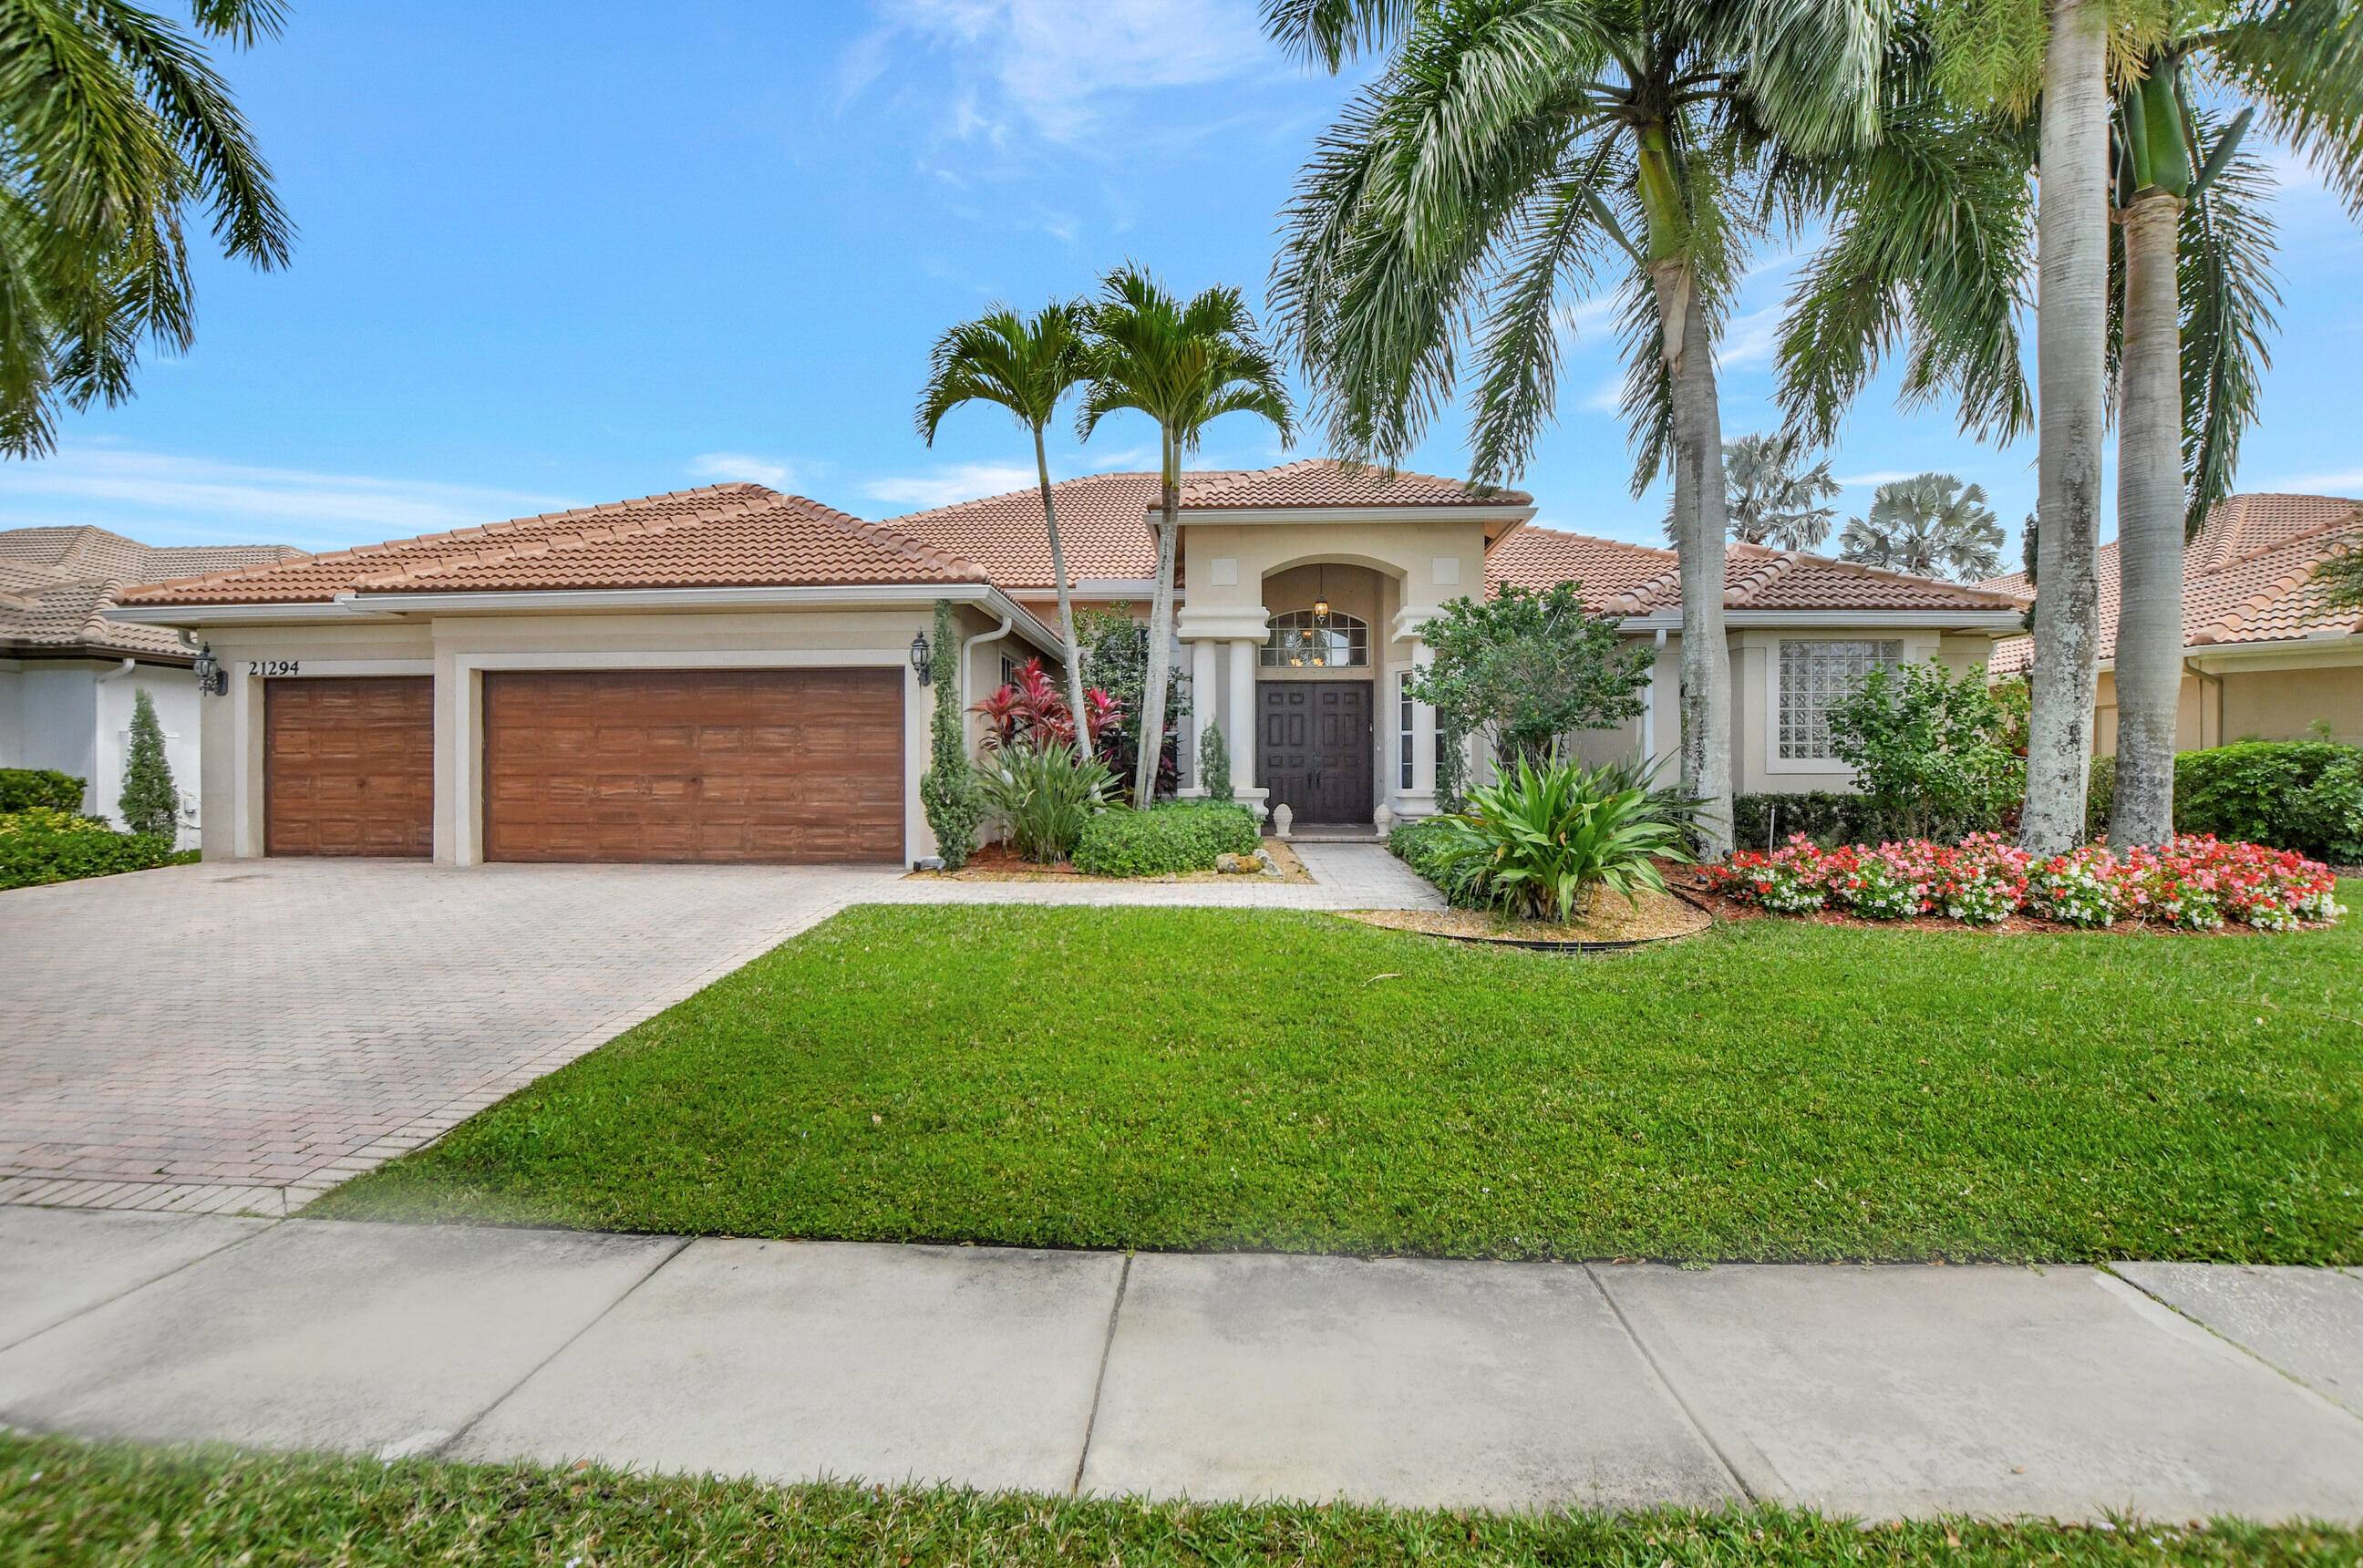 Beautiful one story single family home located within the security gates of the Estates Section of Boca Falls.